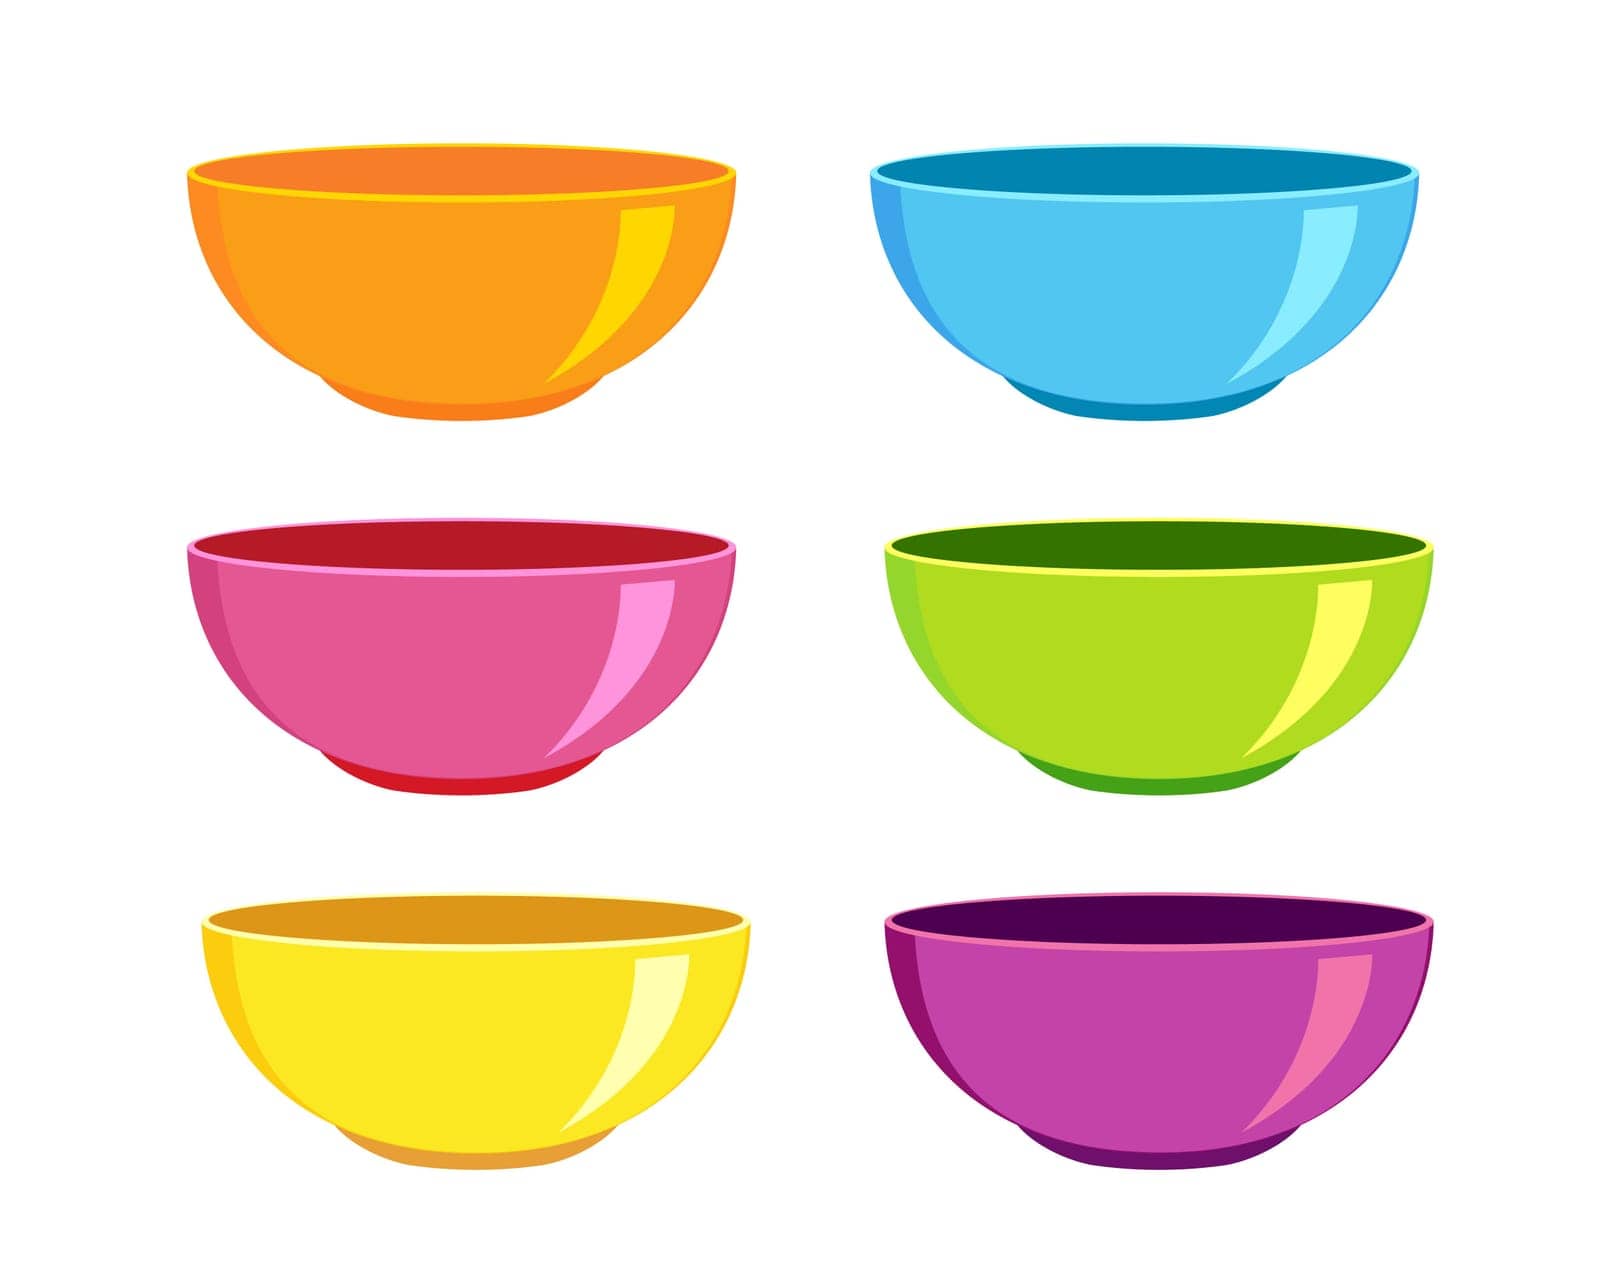 Collection of empty colorful bowls isolated on white background. Clean dishware for breakfast or dinner. Vector illustration by Ablohina